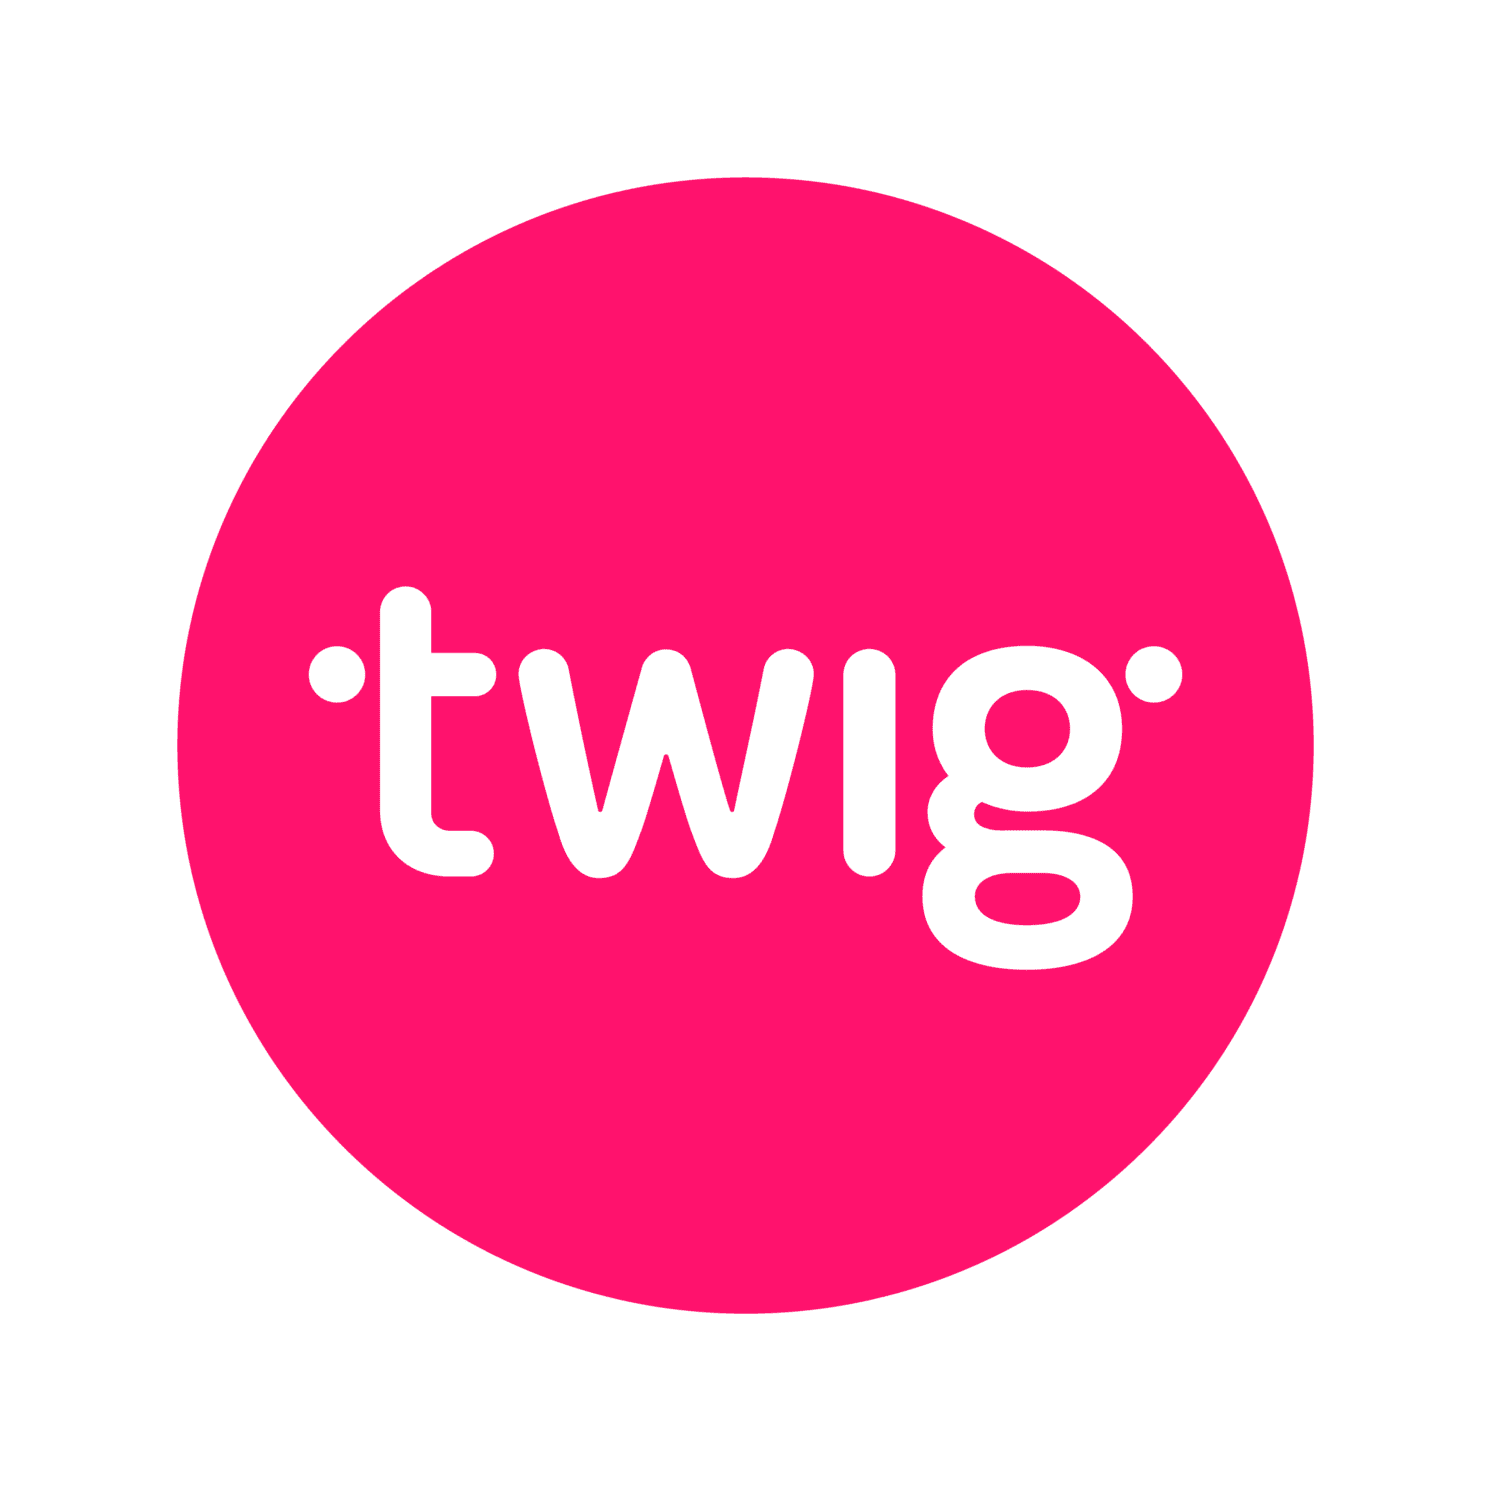 This is a company logo for twig